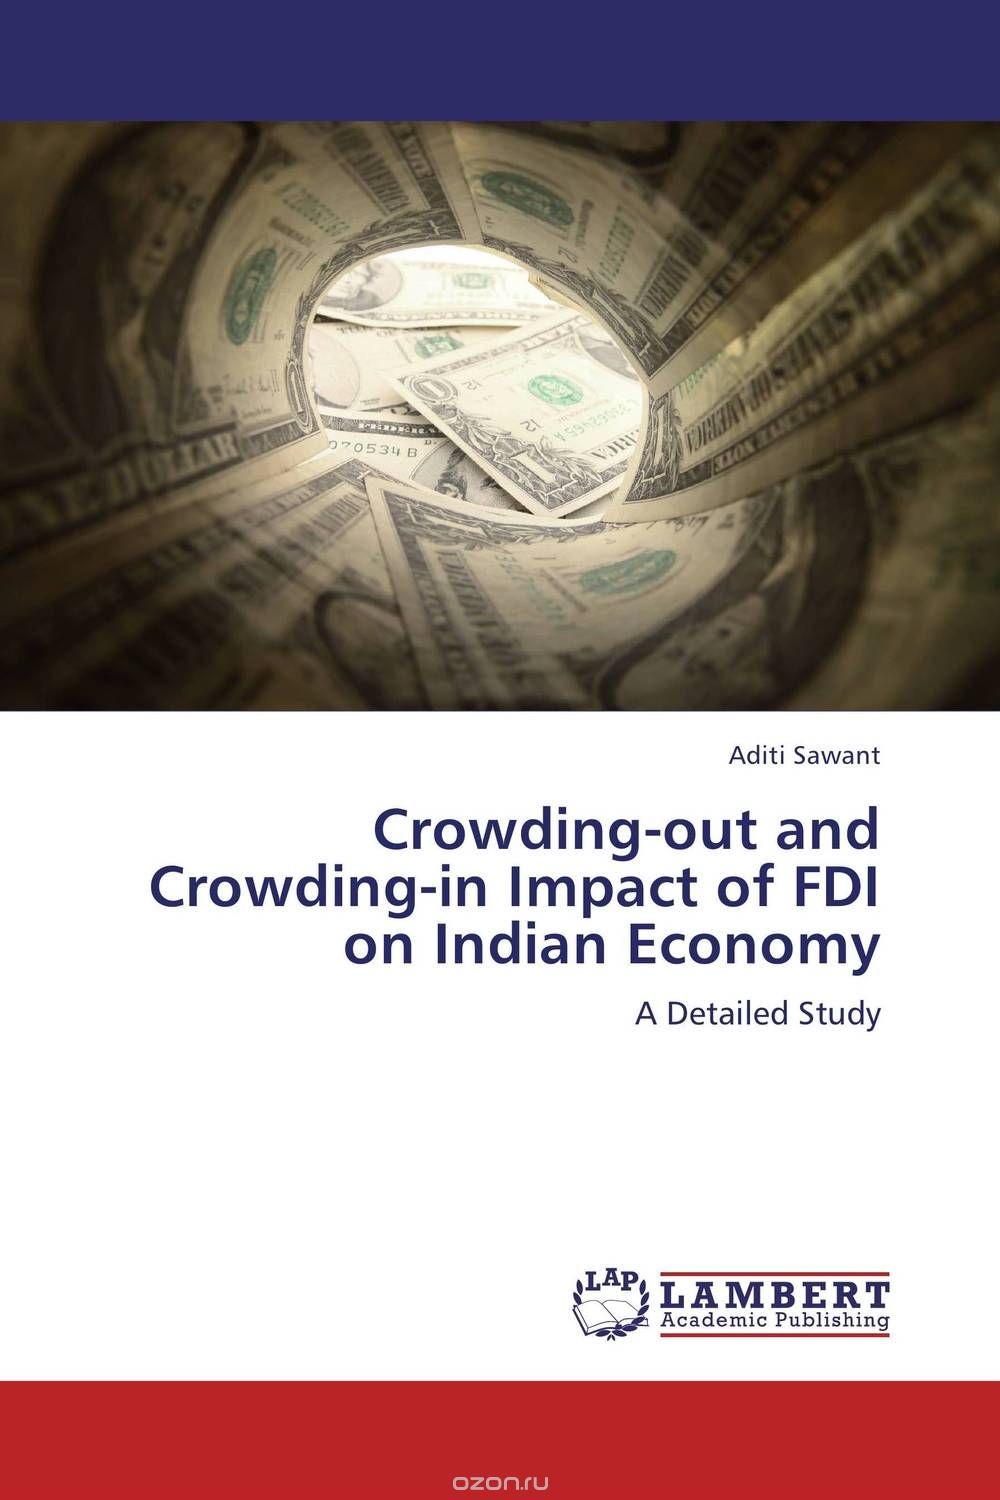 Скачать книгу "Crowding-out and Crowding-in Impact of FDI on Indian Economy"